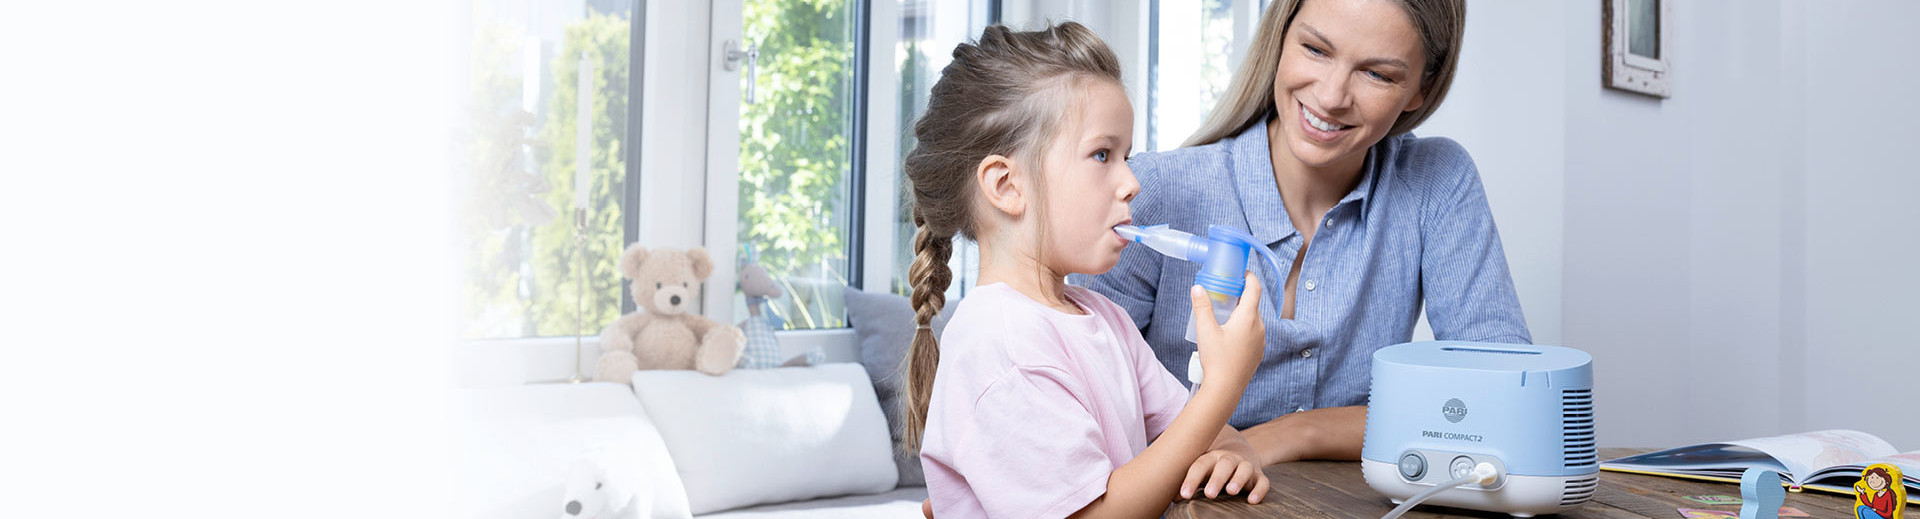 How to use a nebuliser – Using a nebuliser is easy